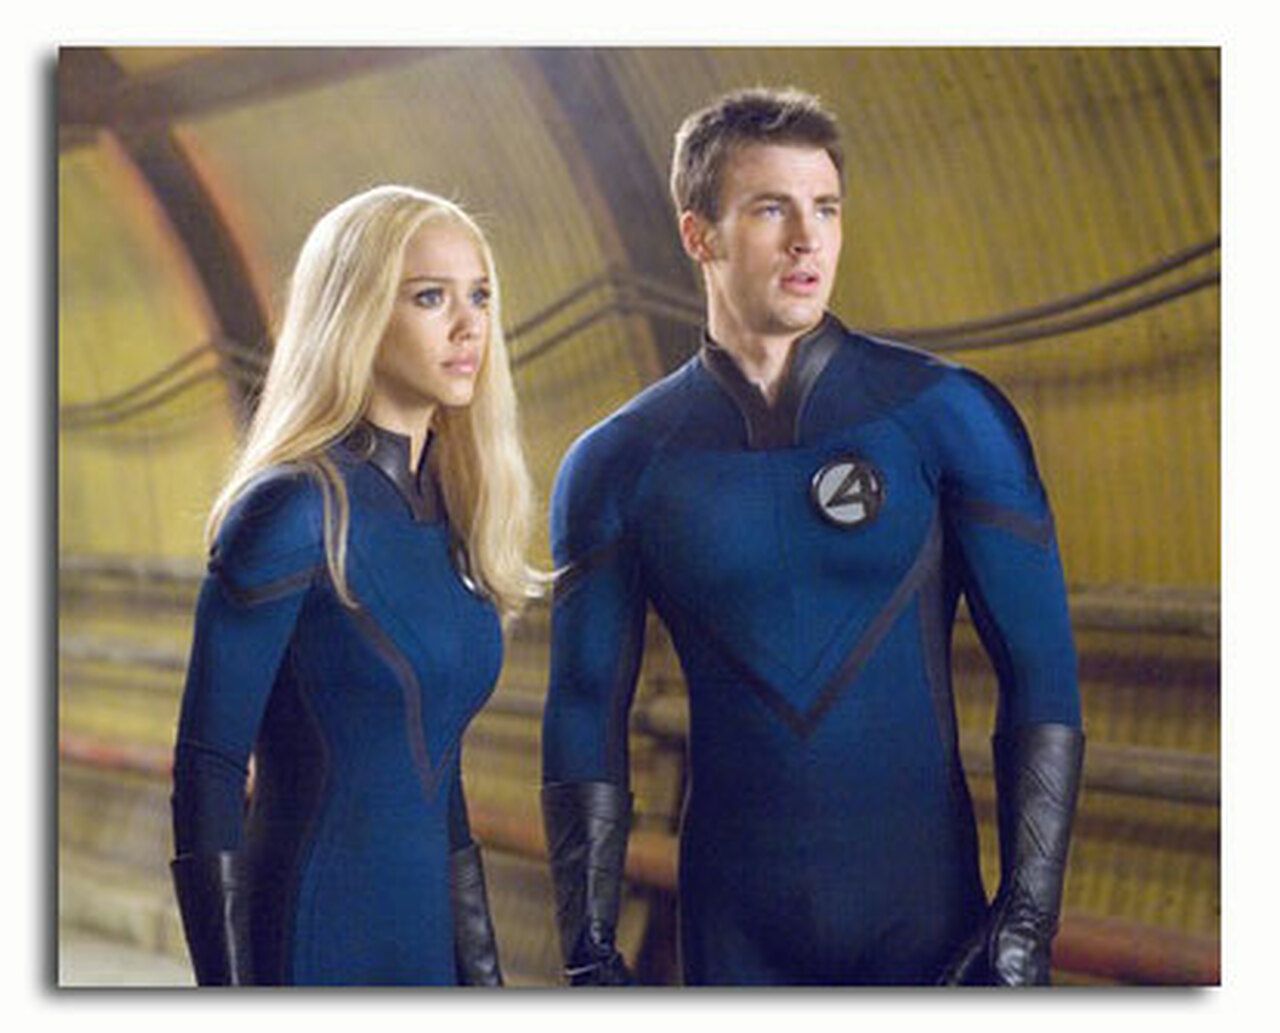 SS3580954) Movie picture of Fantastic Four: Rise of the Silver Surfer buy celebrity photo and posters at Starstills.com